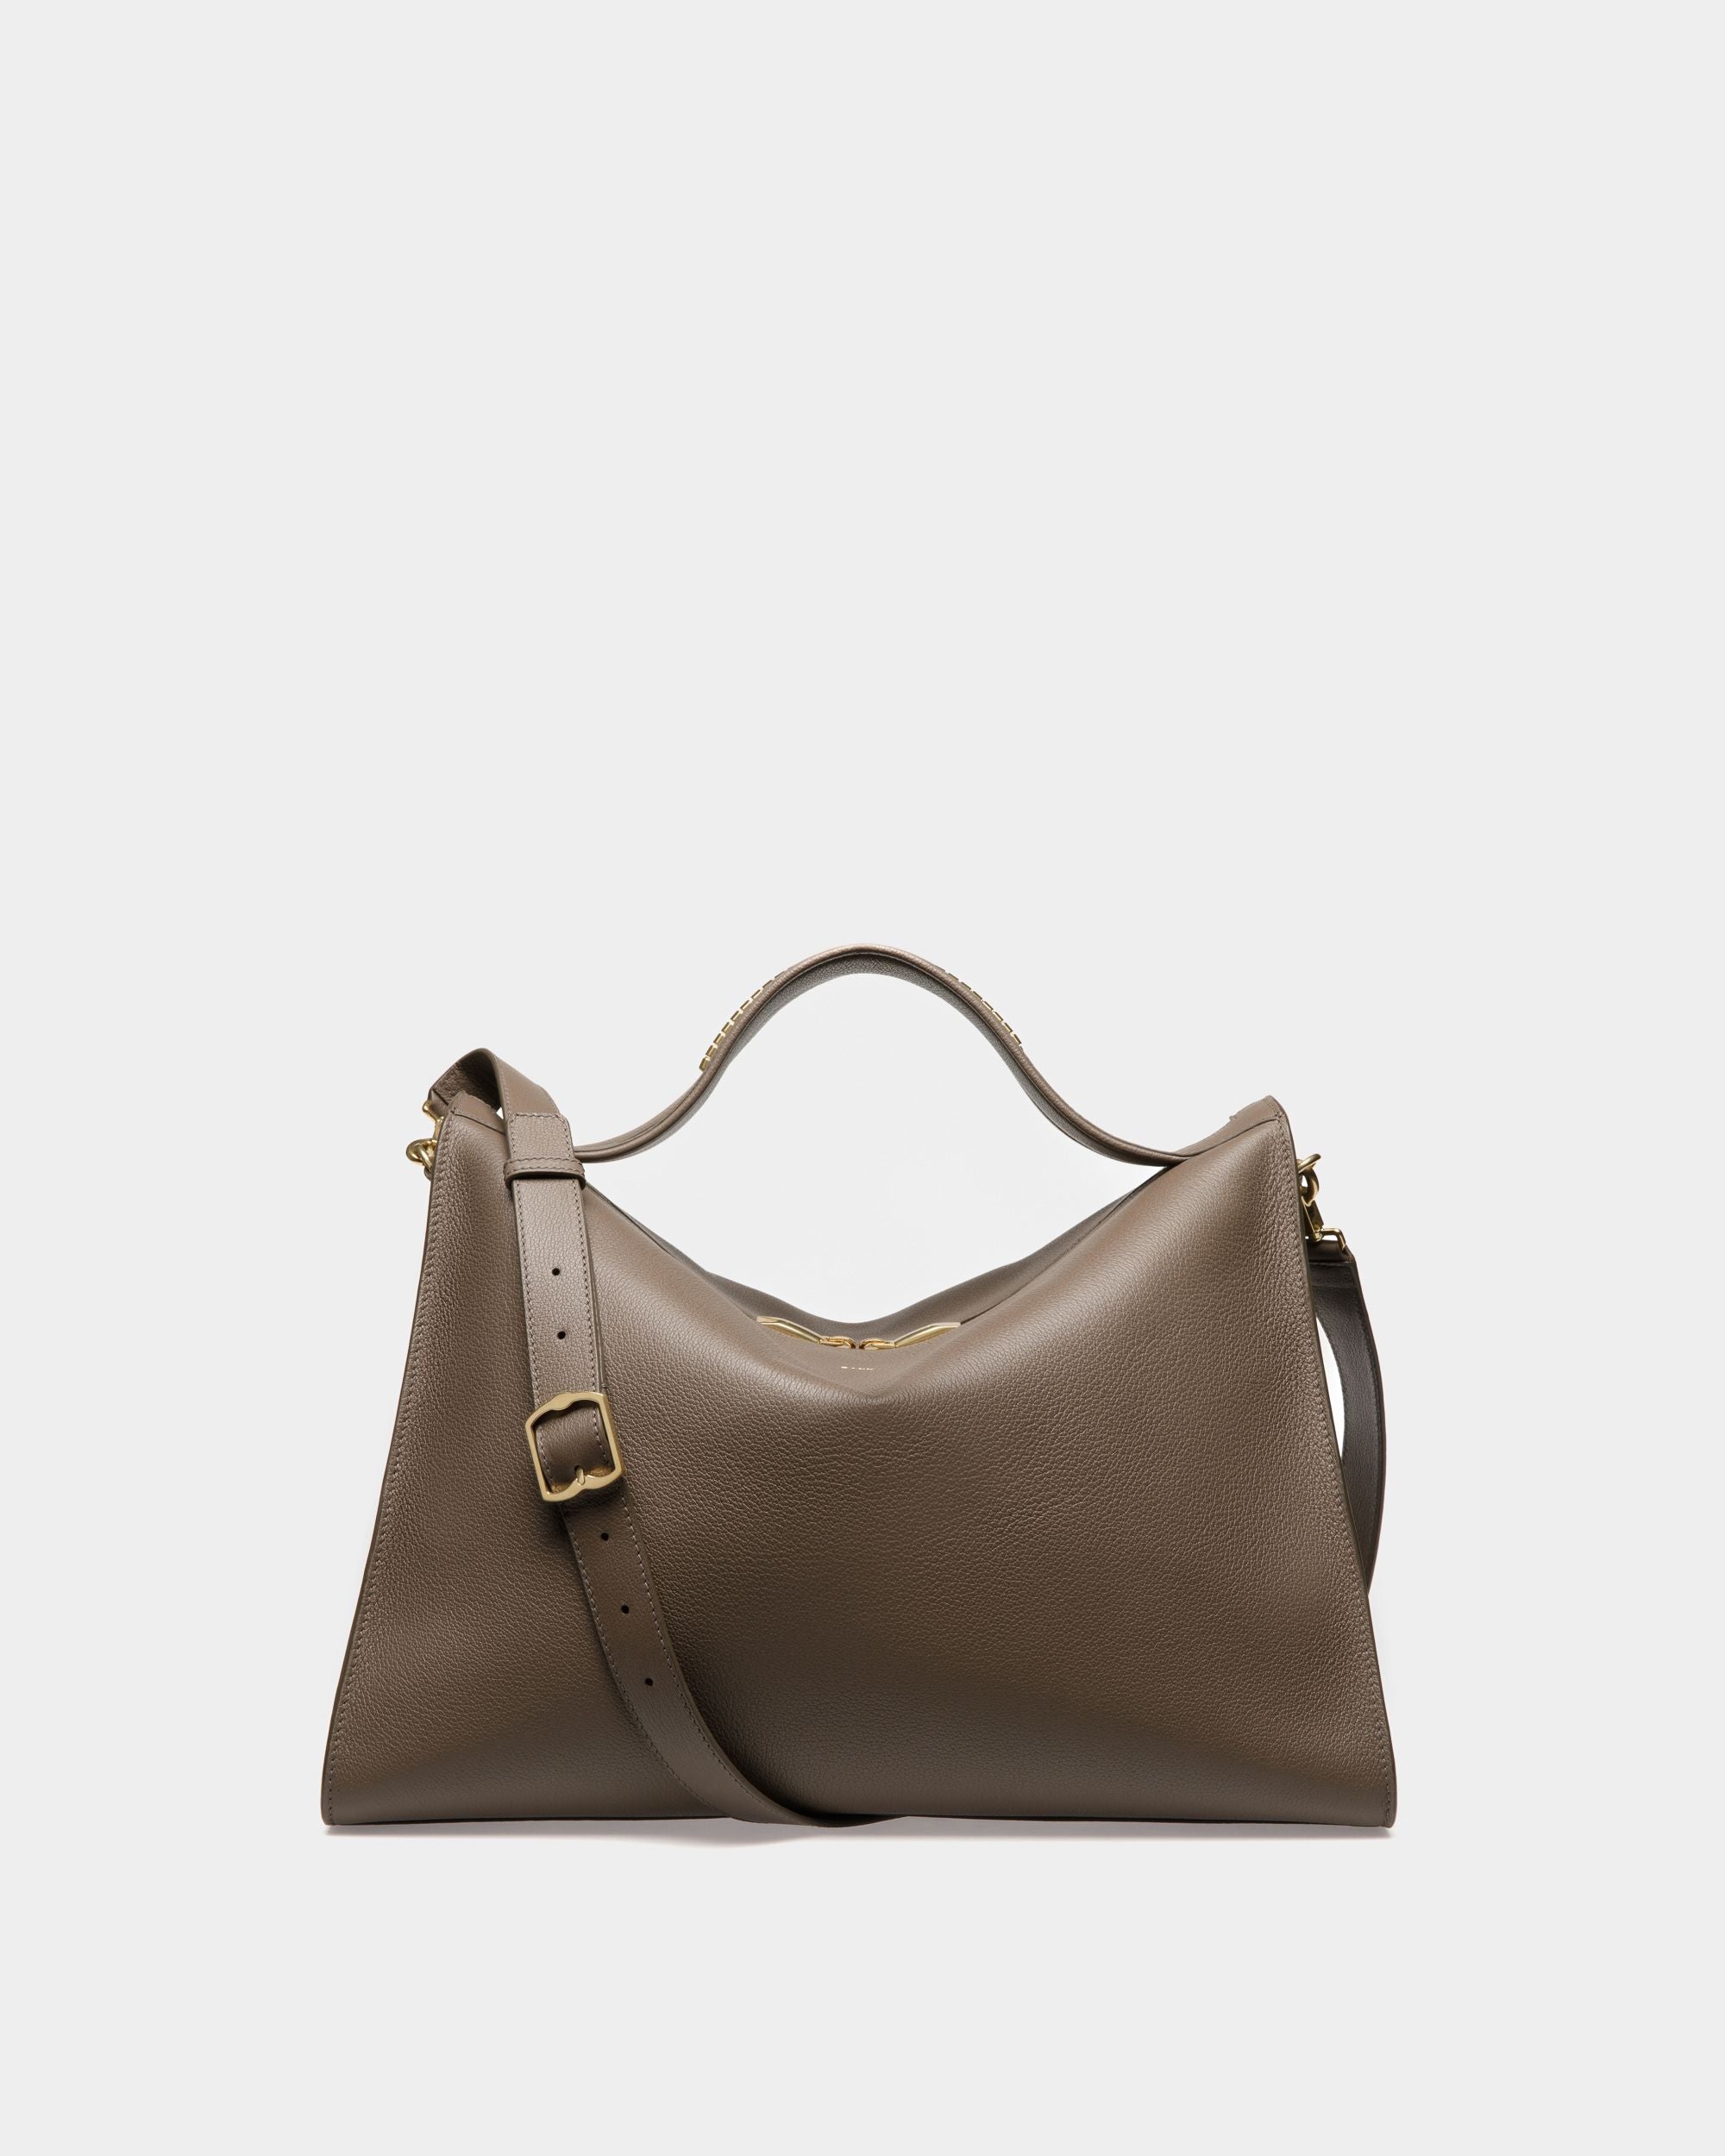 Arkle Soft Tote Bag | Men's Tote Bag |Grey Leather | Bally | Still Life Front